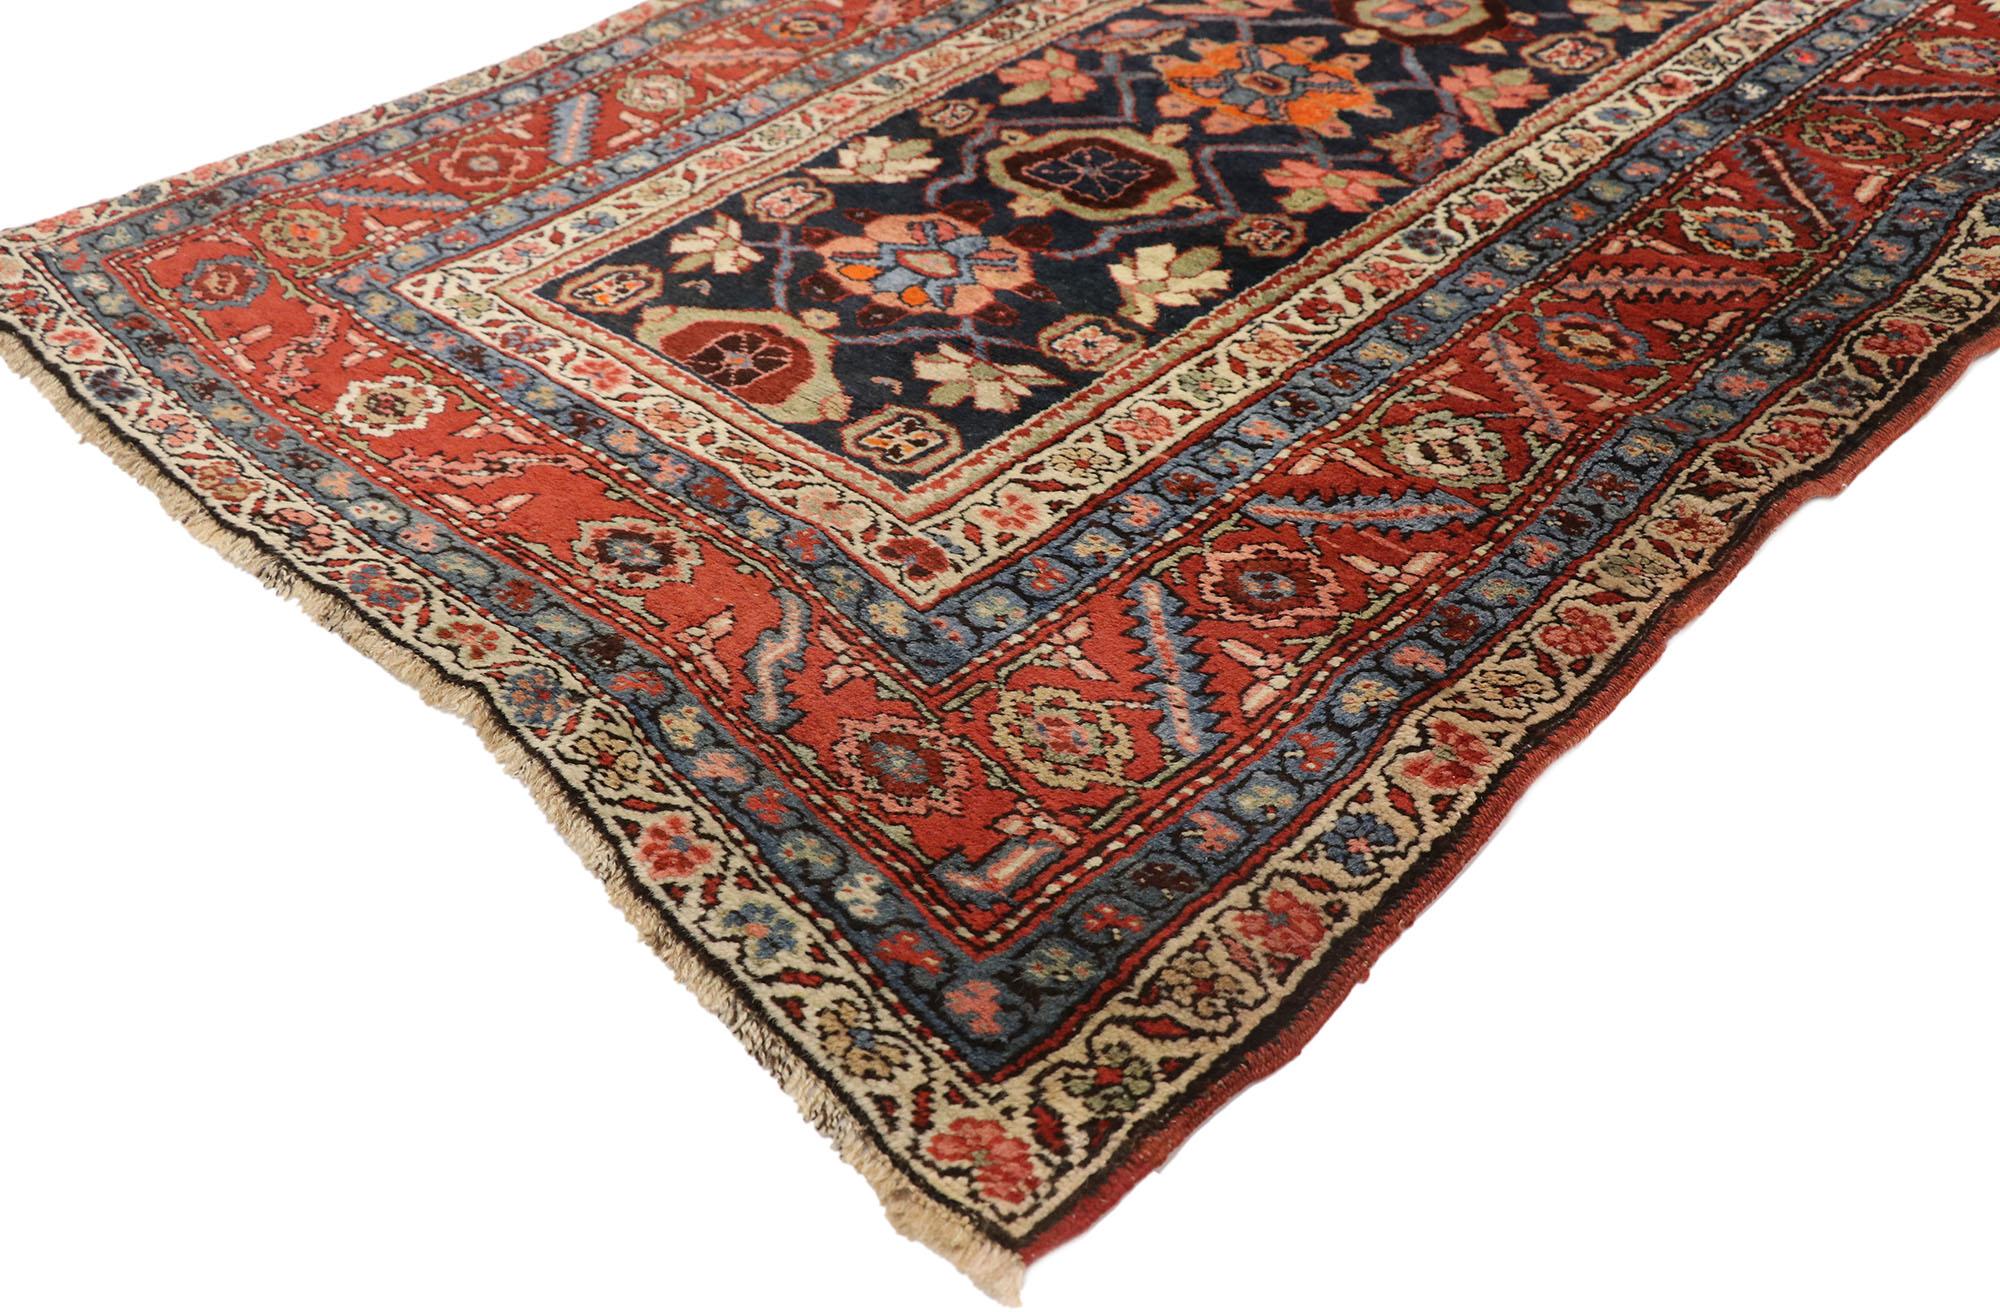 77395, vintage Persian Heriz runner with Mina Khani pattern, extra-long Hallway runner 03'00 x 17'04. This hand knotted wool vintage Persian Heriz runner features a lively all-over Mina Khani pattern spread across an abrashed ink blue field. In this